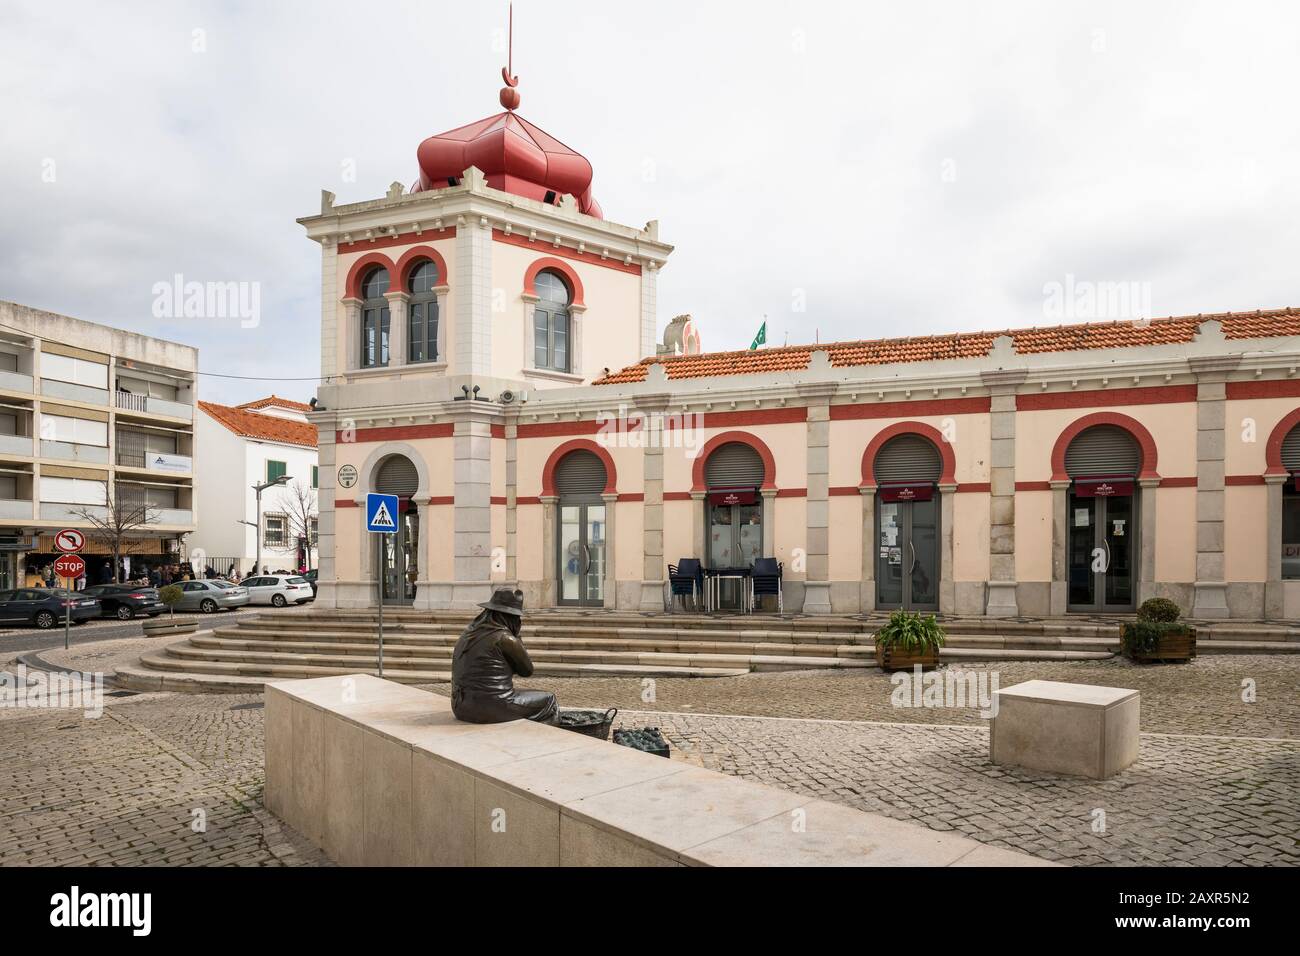 Sculpture of a market woman and covered market in the old town of Loule, Algarve, Faro district, Portugal Stock Photo